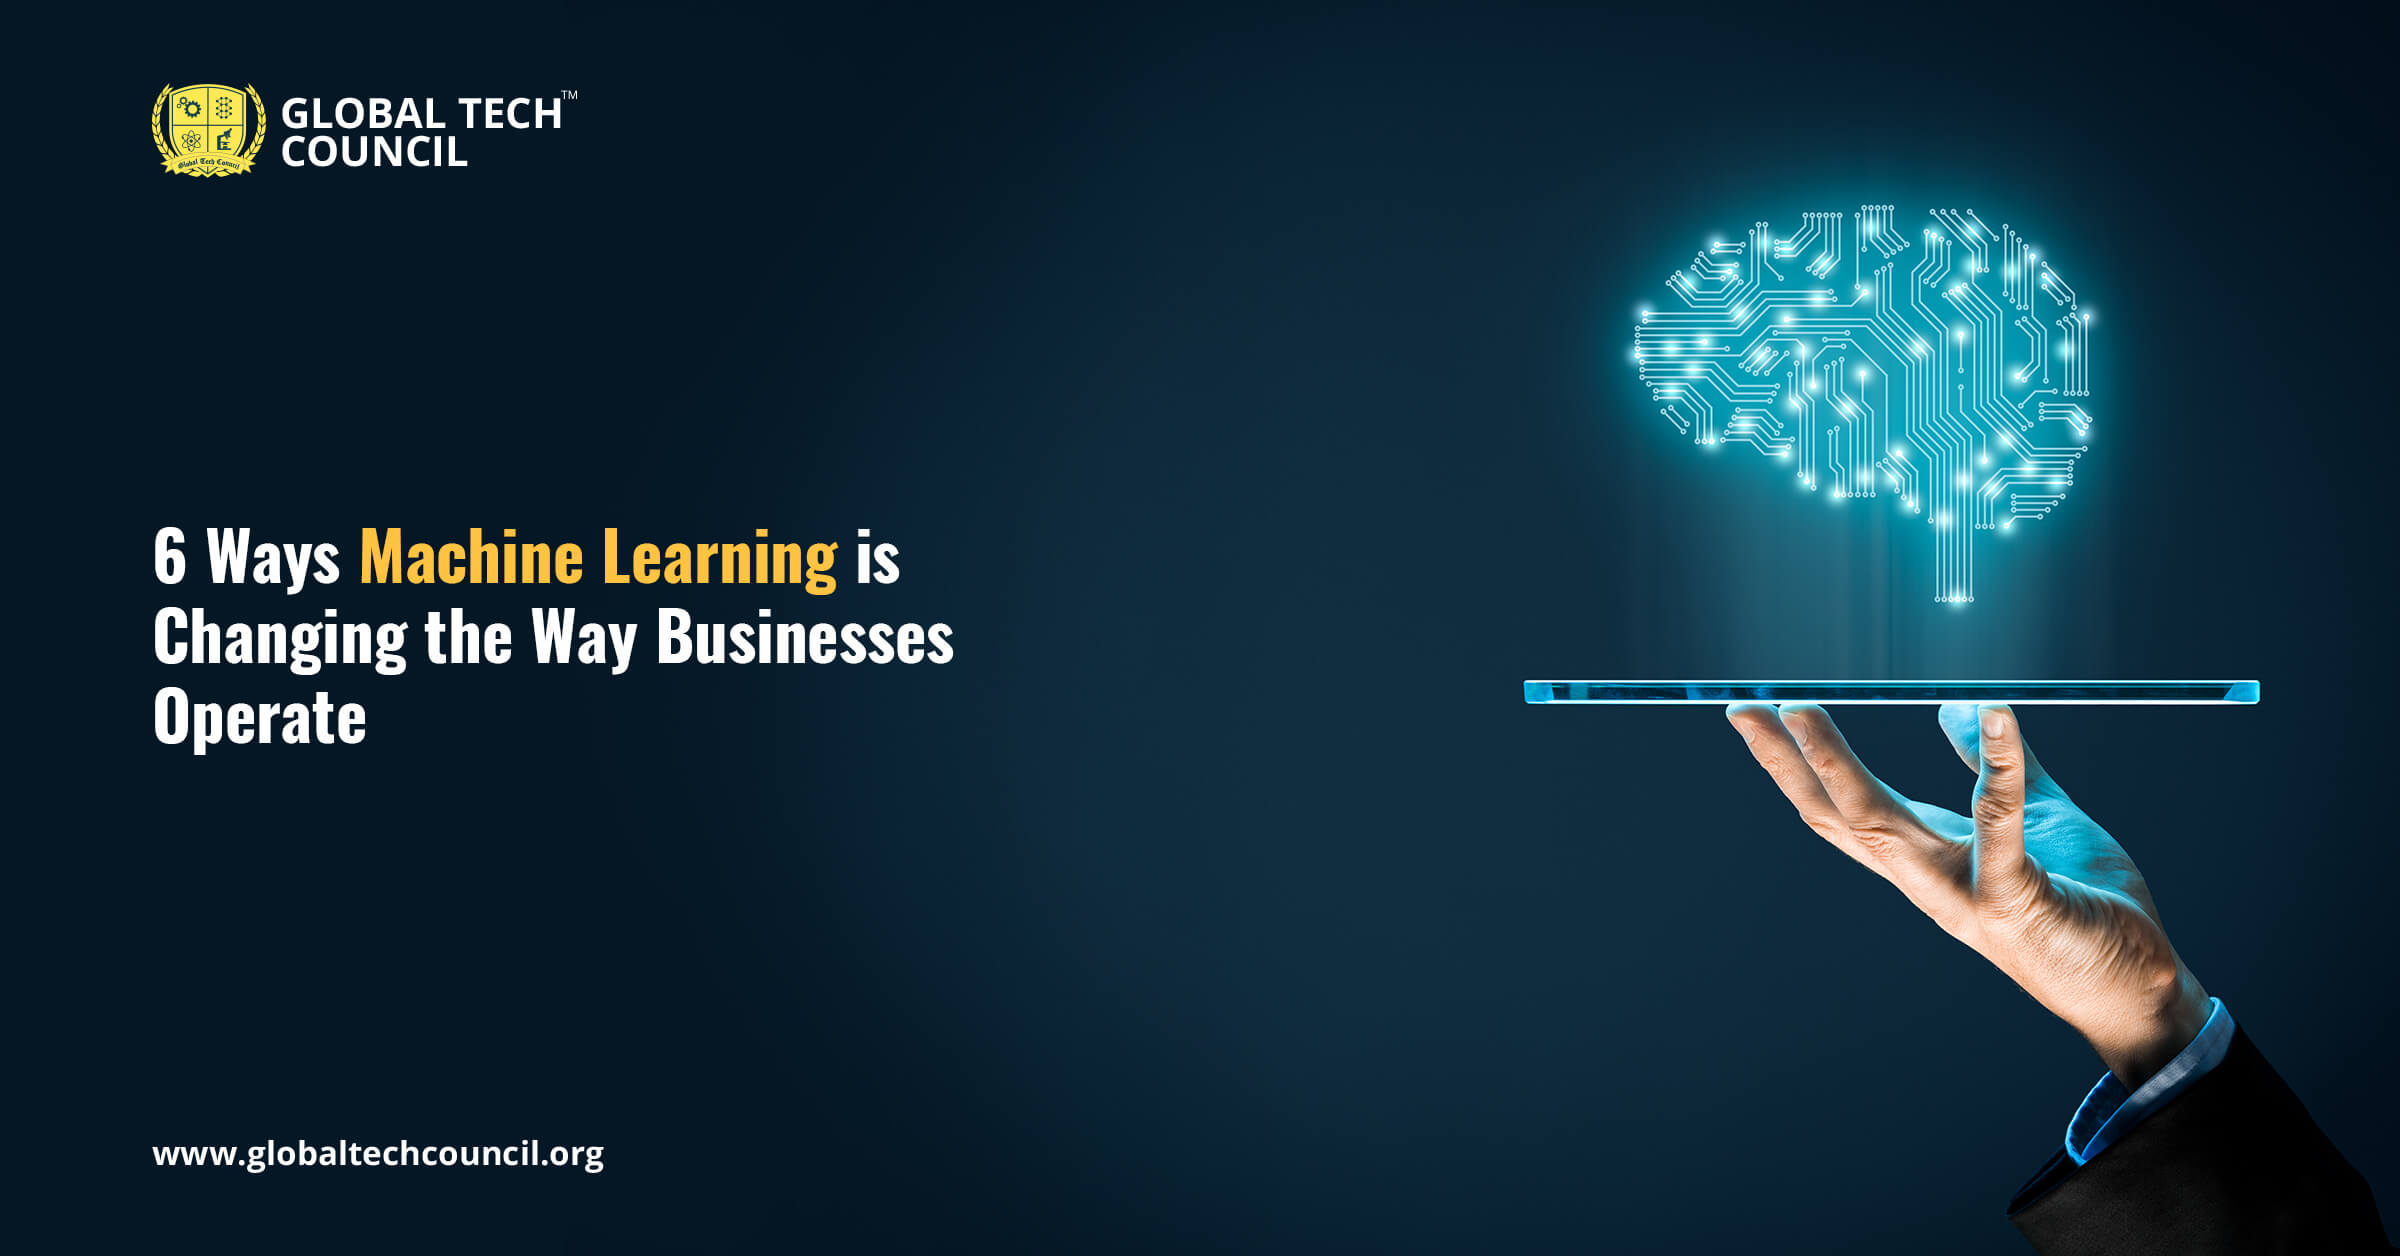 6 Ways Machine Learning is Changing the Way Businesses Operate